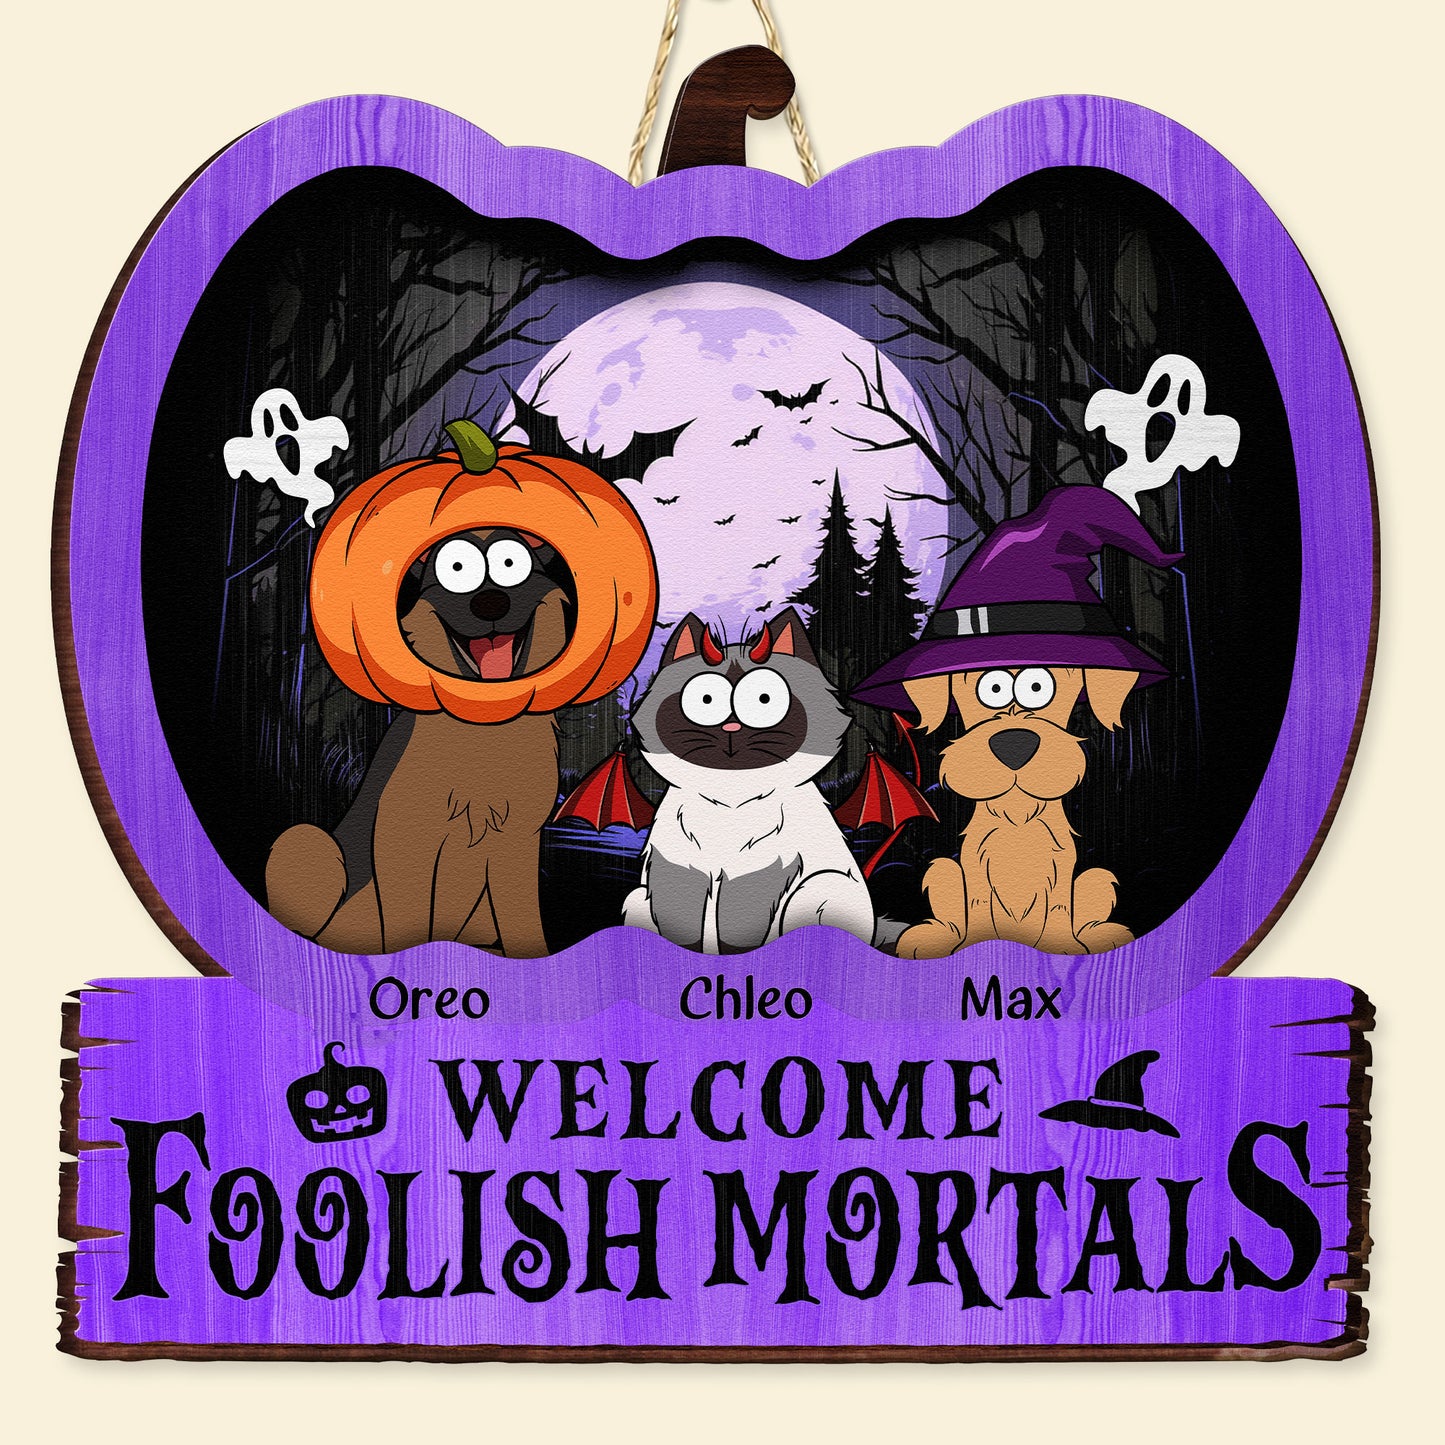 Welcome Foolish Mortals - Personalized Custom Shaped Wood Sign